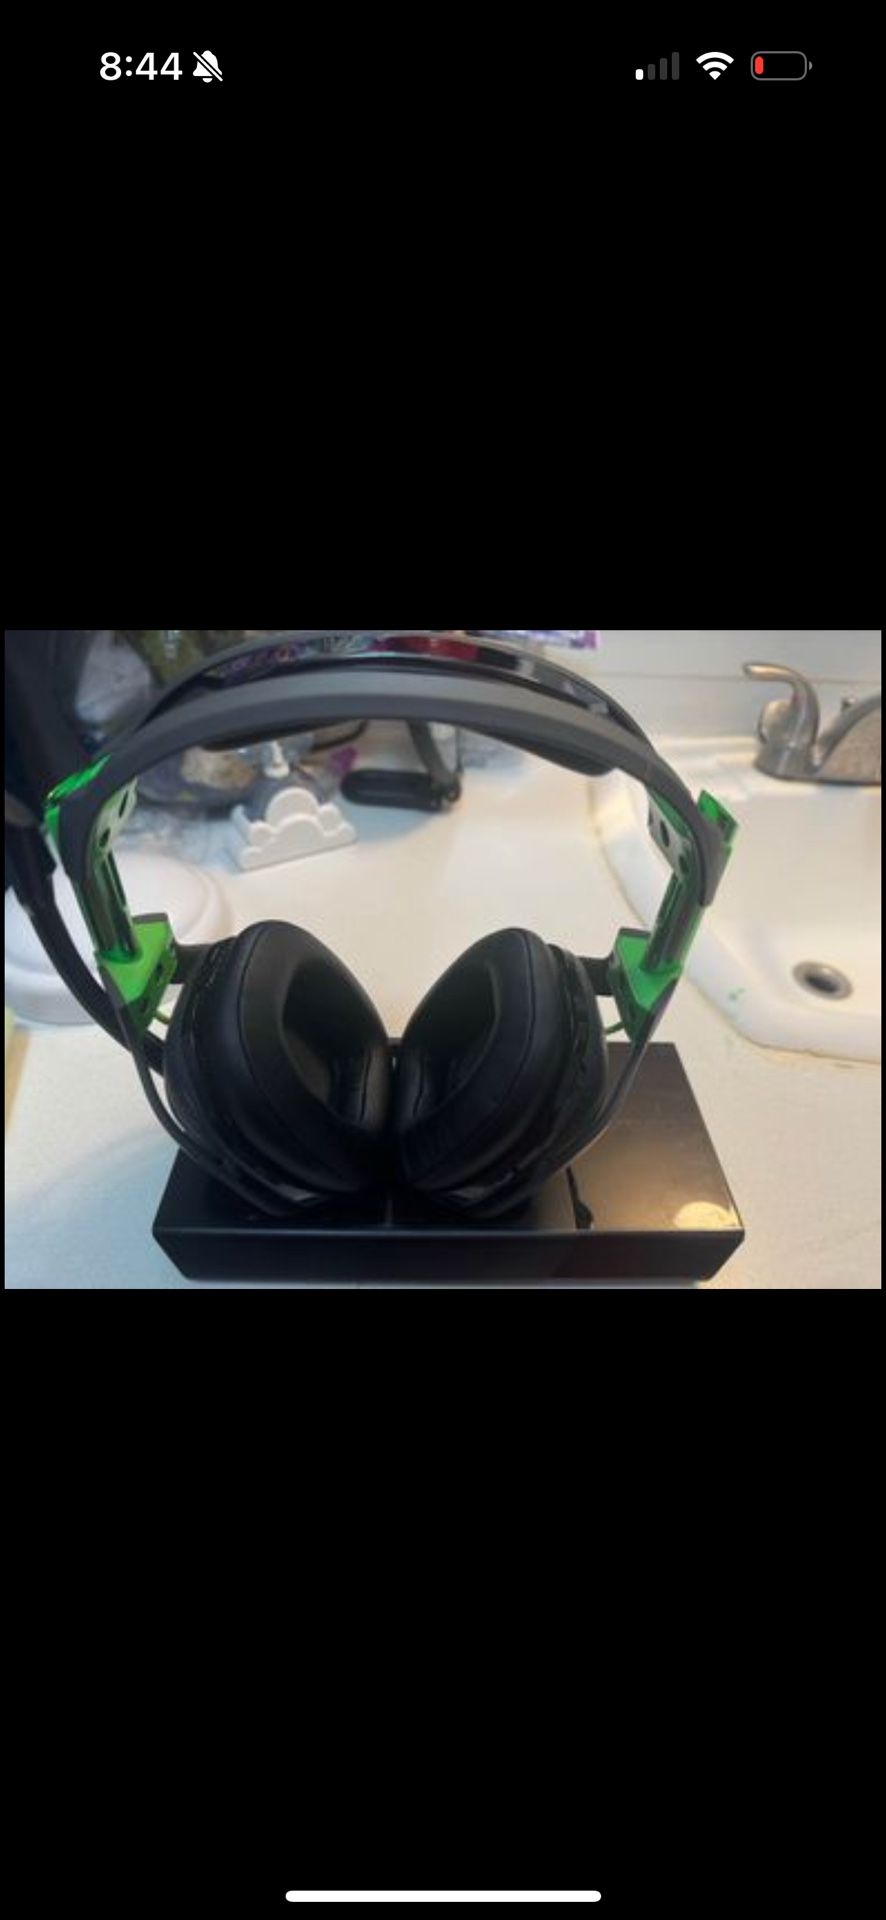 ASTRO Gaming A50 Wireless Dolby Gaming Headset - Black/Green - Xbox One + PC